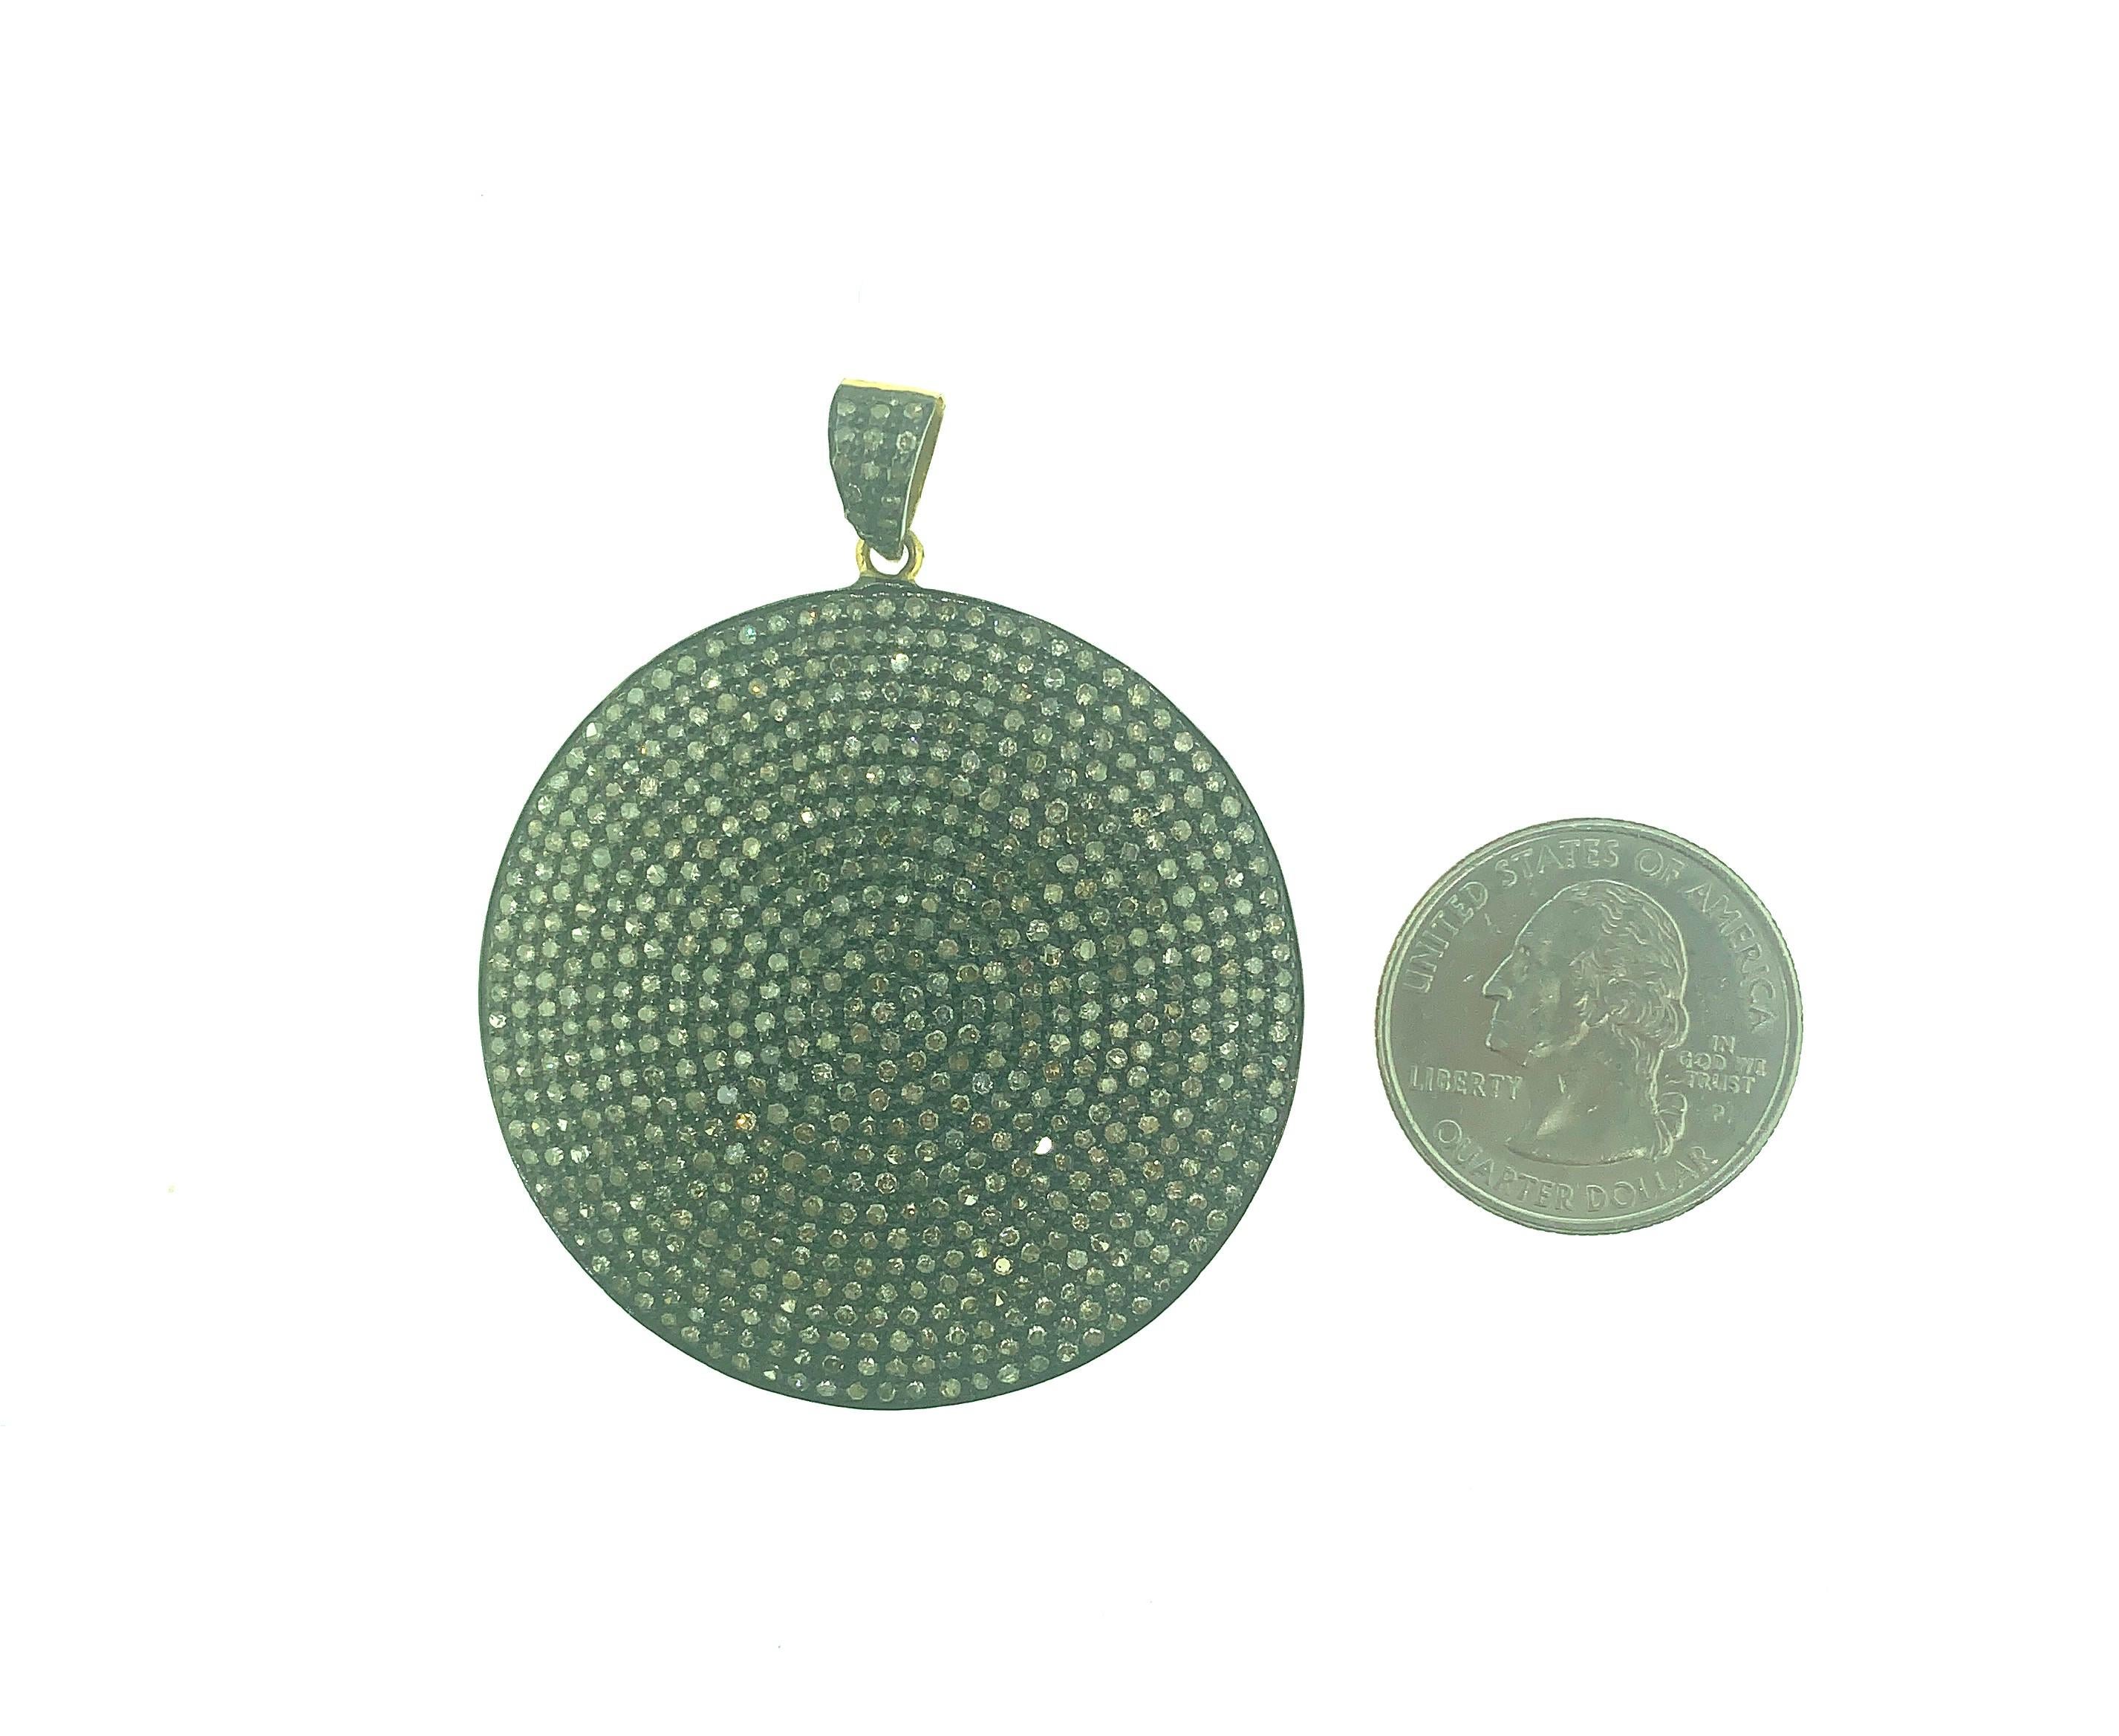 6.15 ct Round Pave Champagne Diamond Disc Pendant set in Oxidized Sterling Silver back of bail in 14KT Gold. This 2.5 Inch long (including bail) is made in India. 
Diamonds - 6.15 ct Champagne Diamonds
Dimension : 2.5 Inch (Including Bail)
Gross